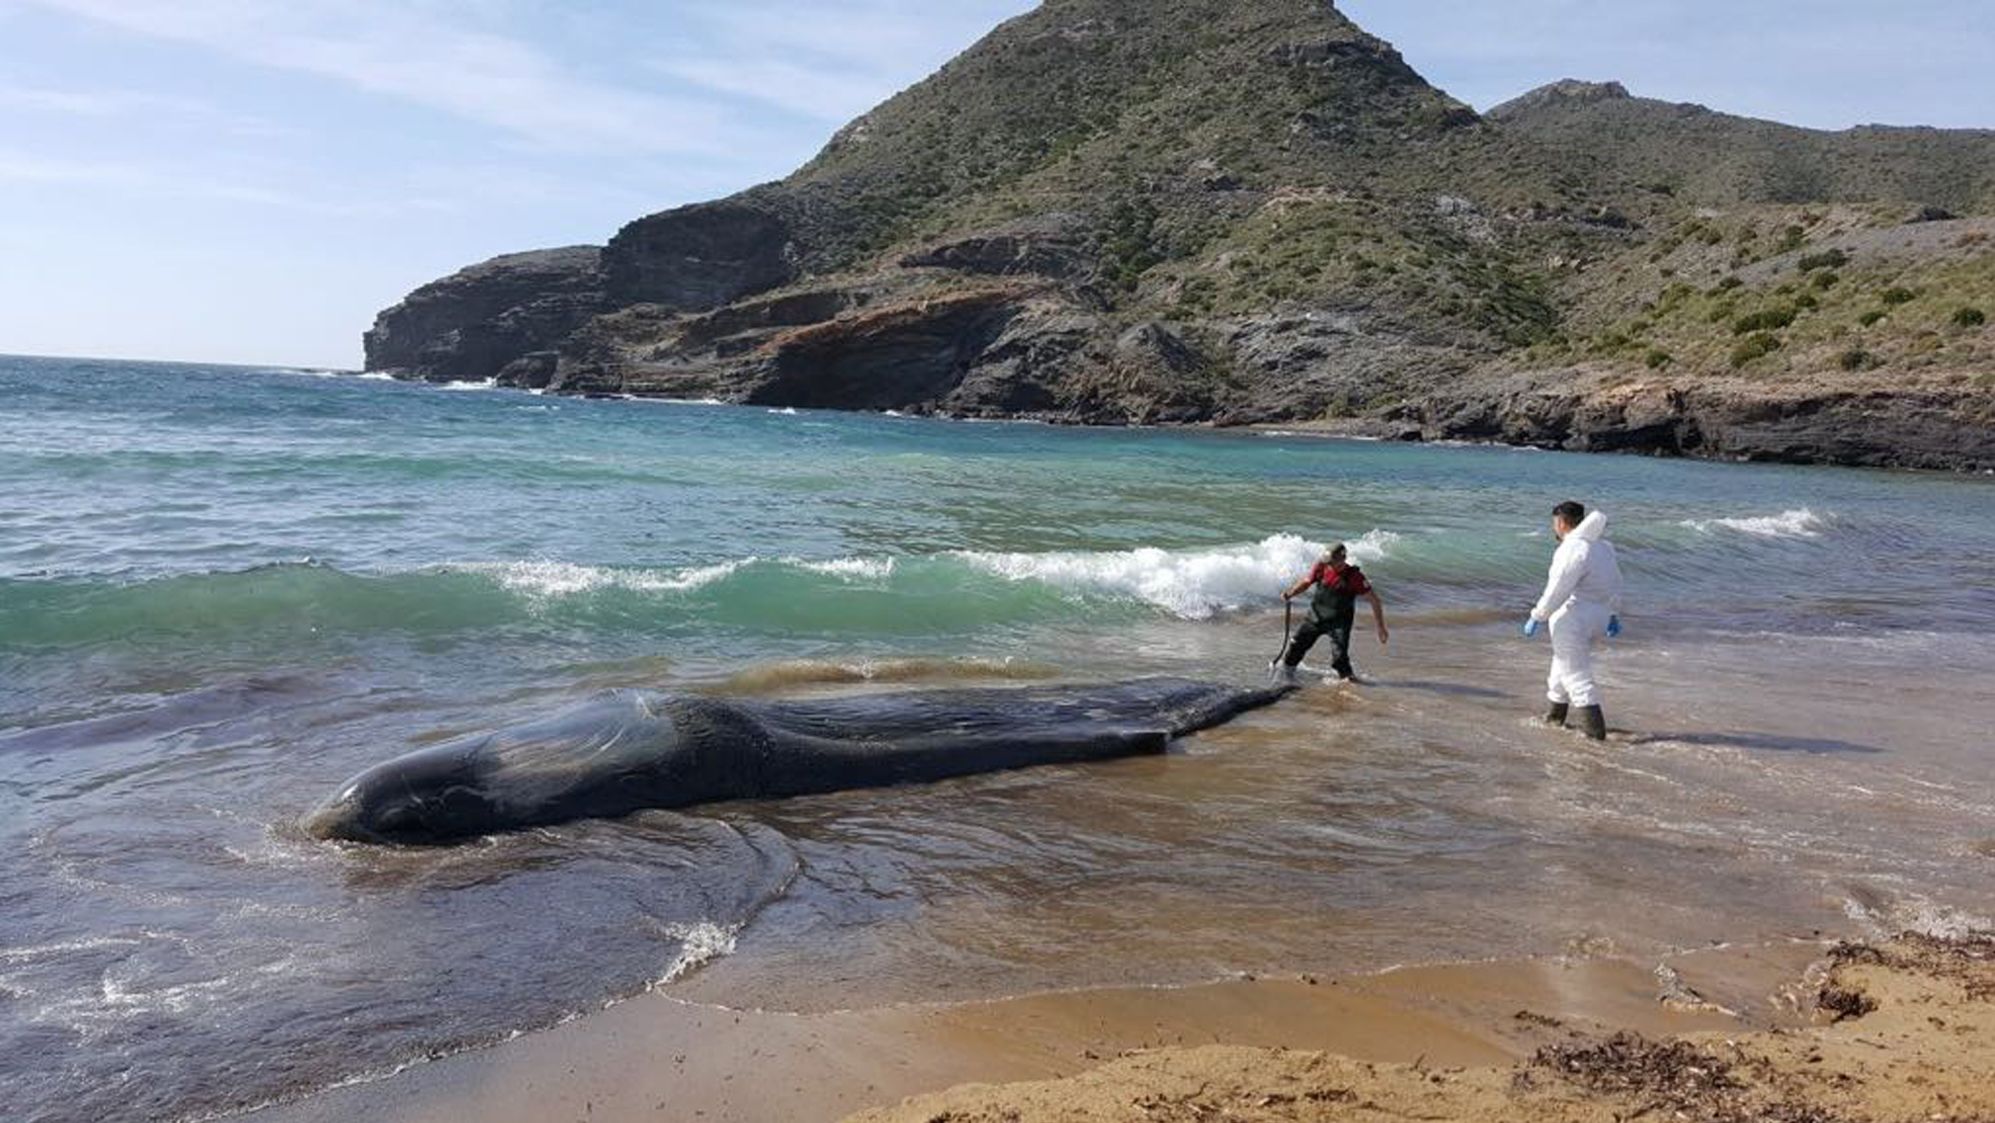 The six-ton mammal was found on February 27 on the beach of Cabo de Palos.